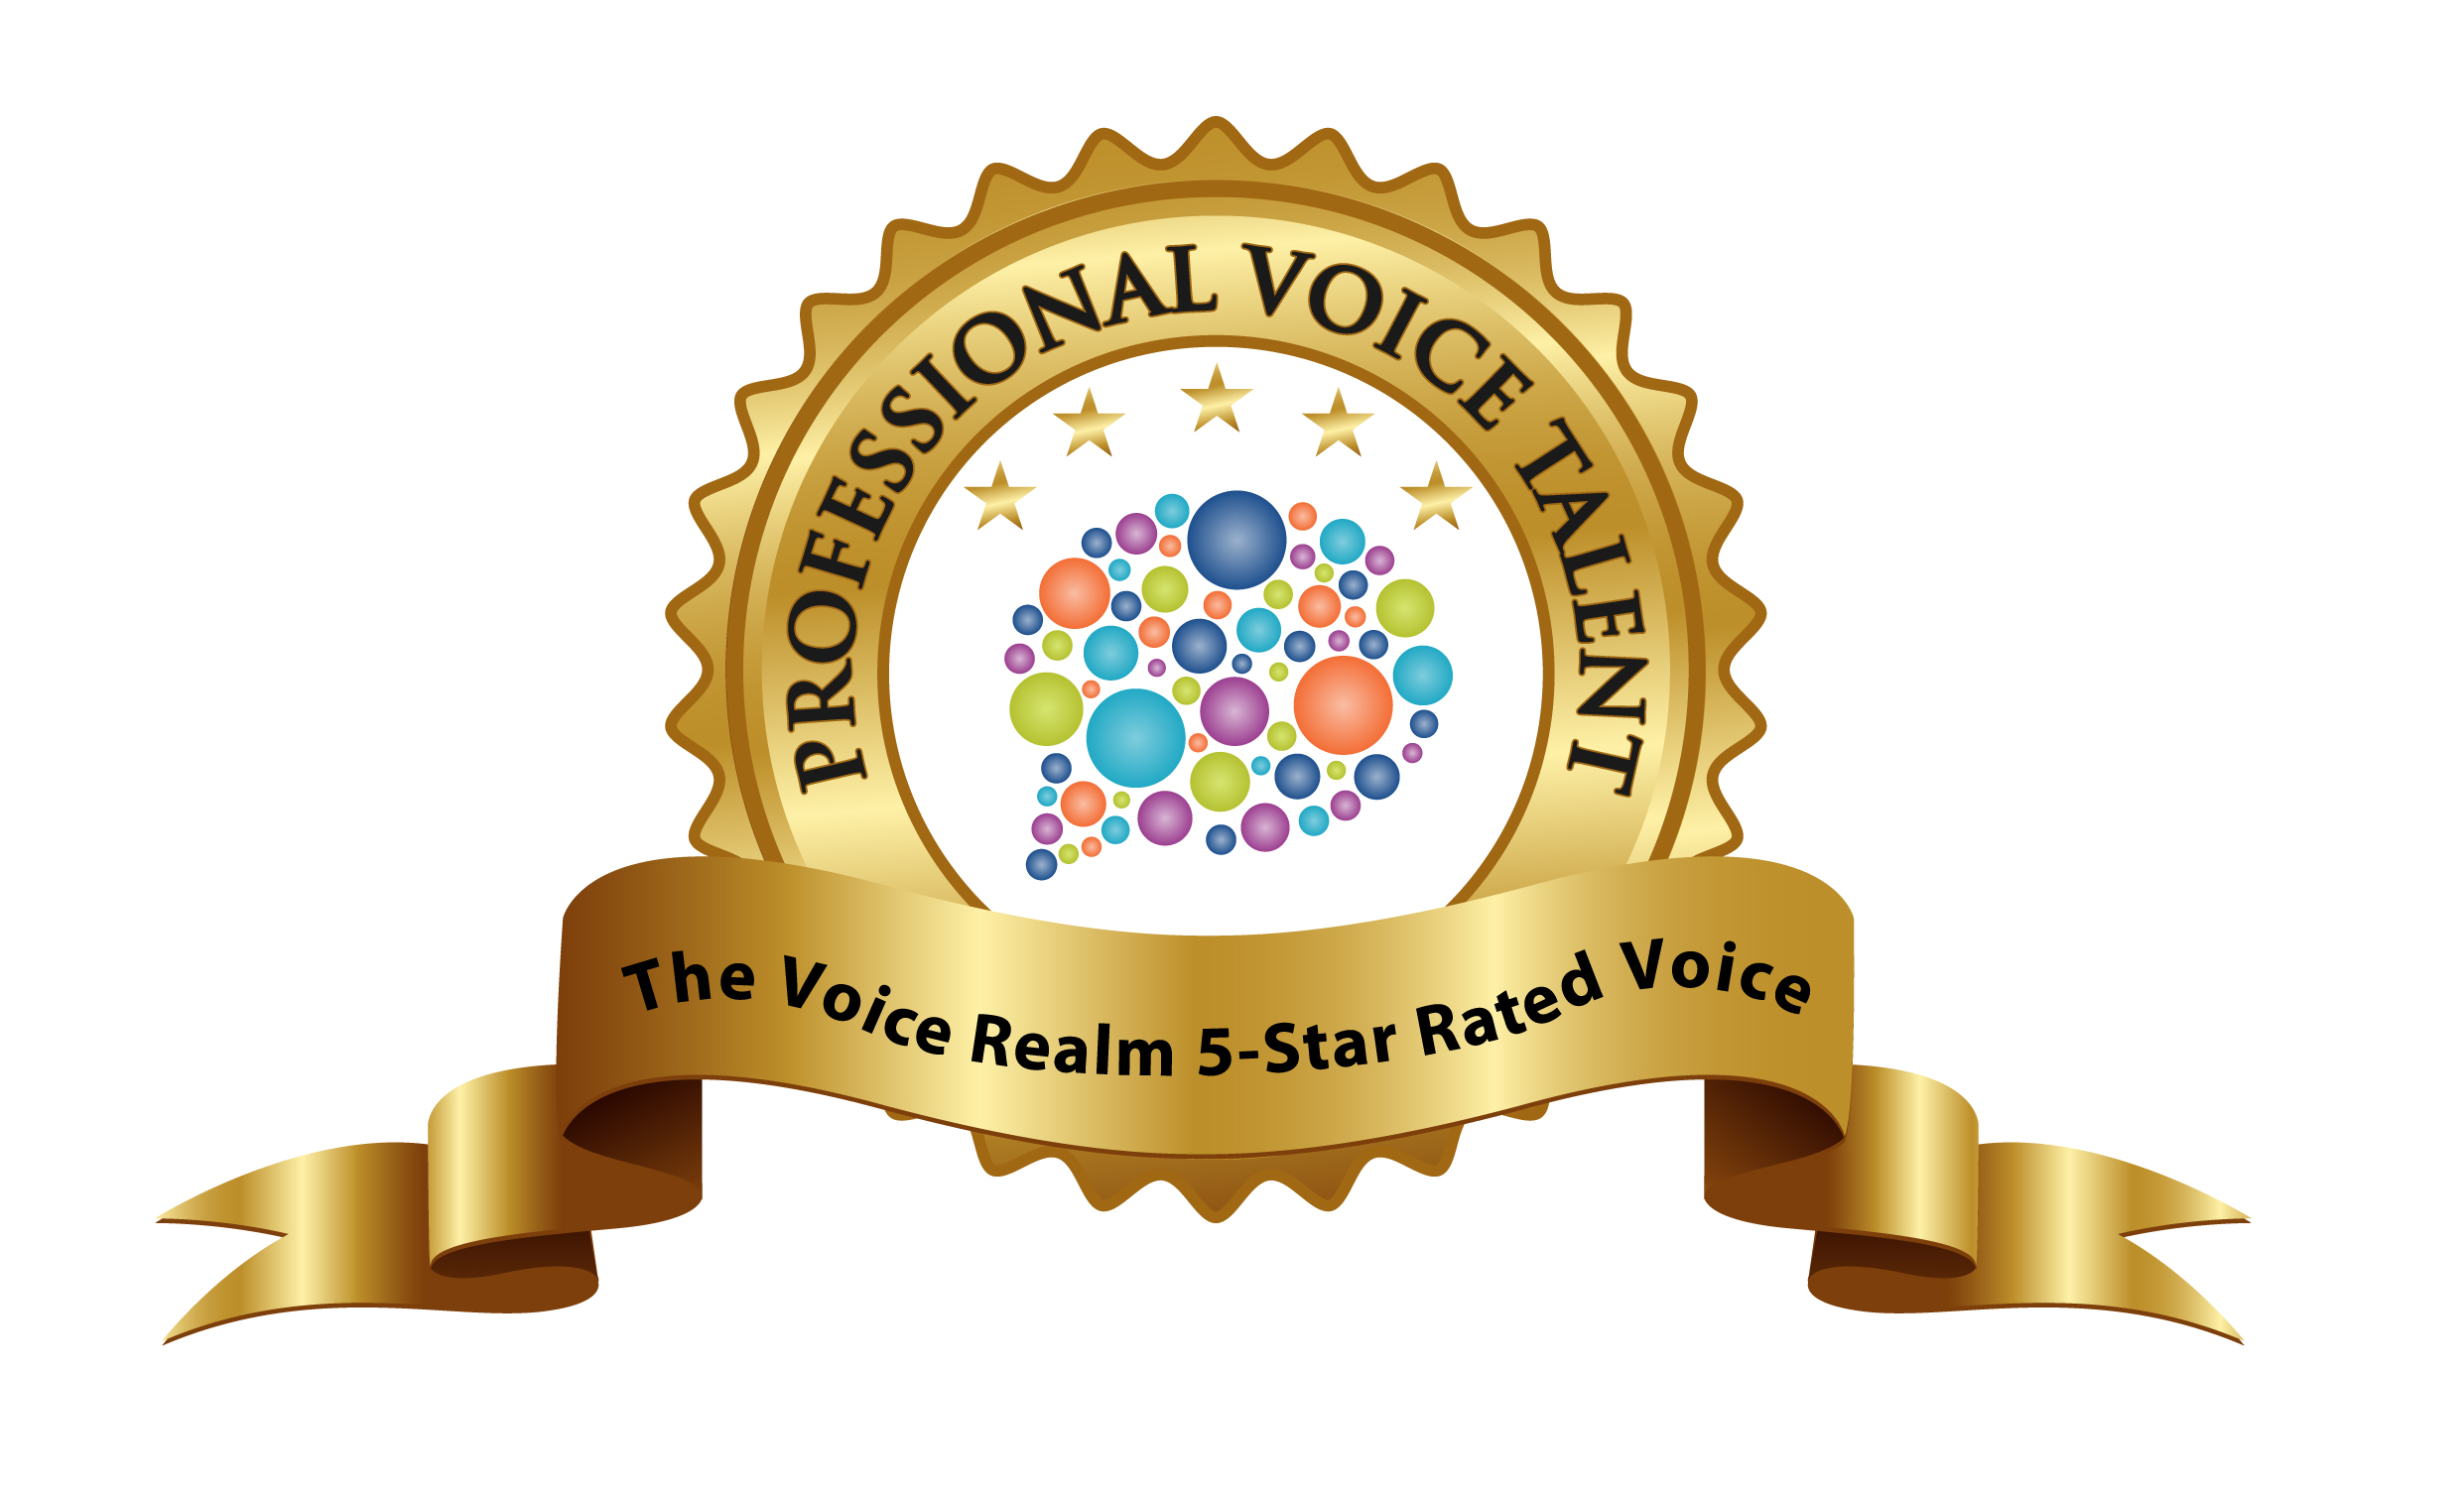 All voice over talent at The Voice Realm are rated 5-Star professionals.